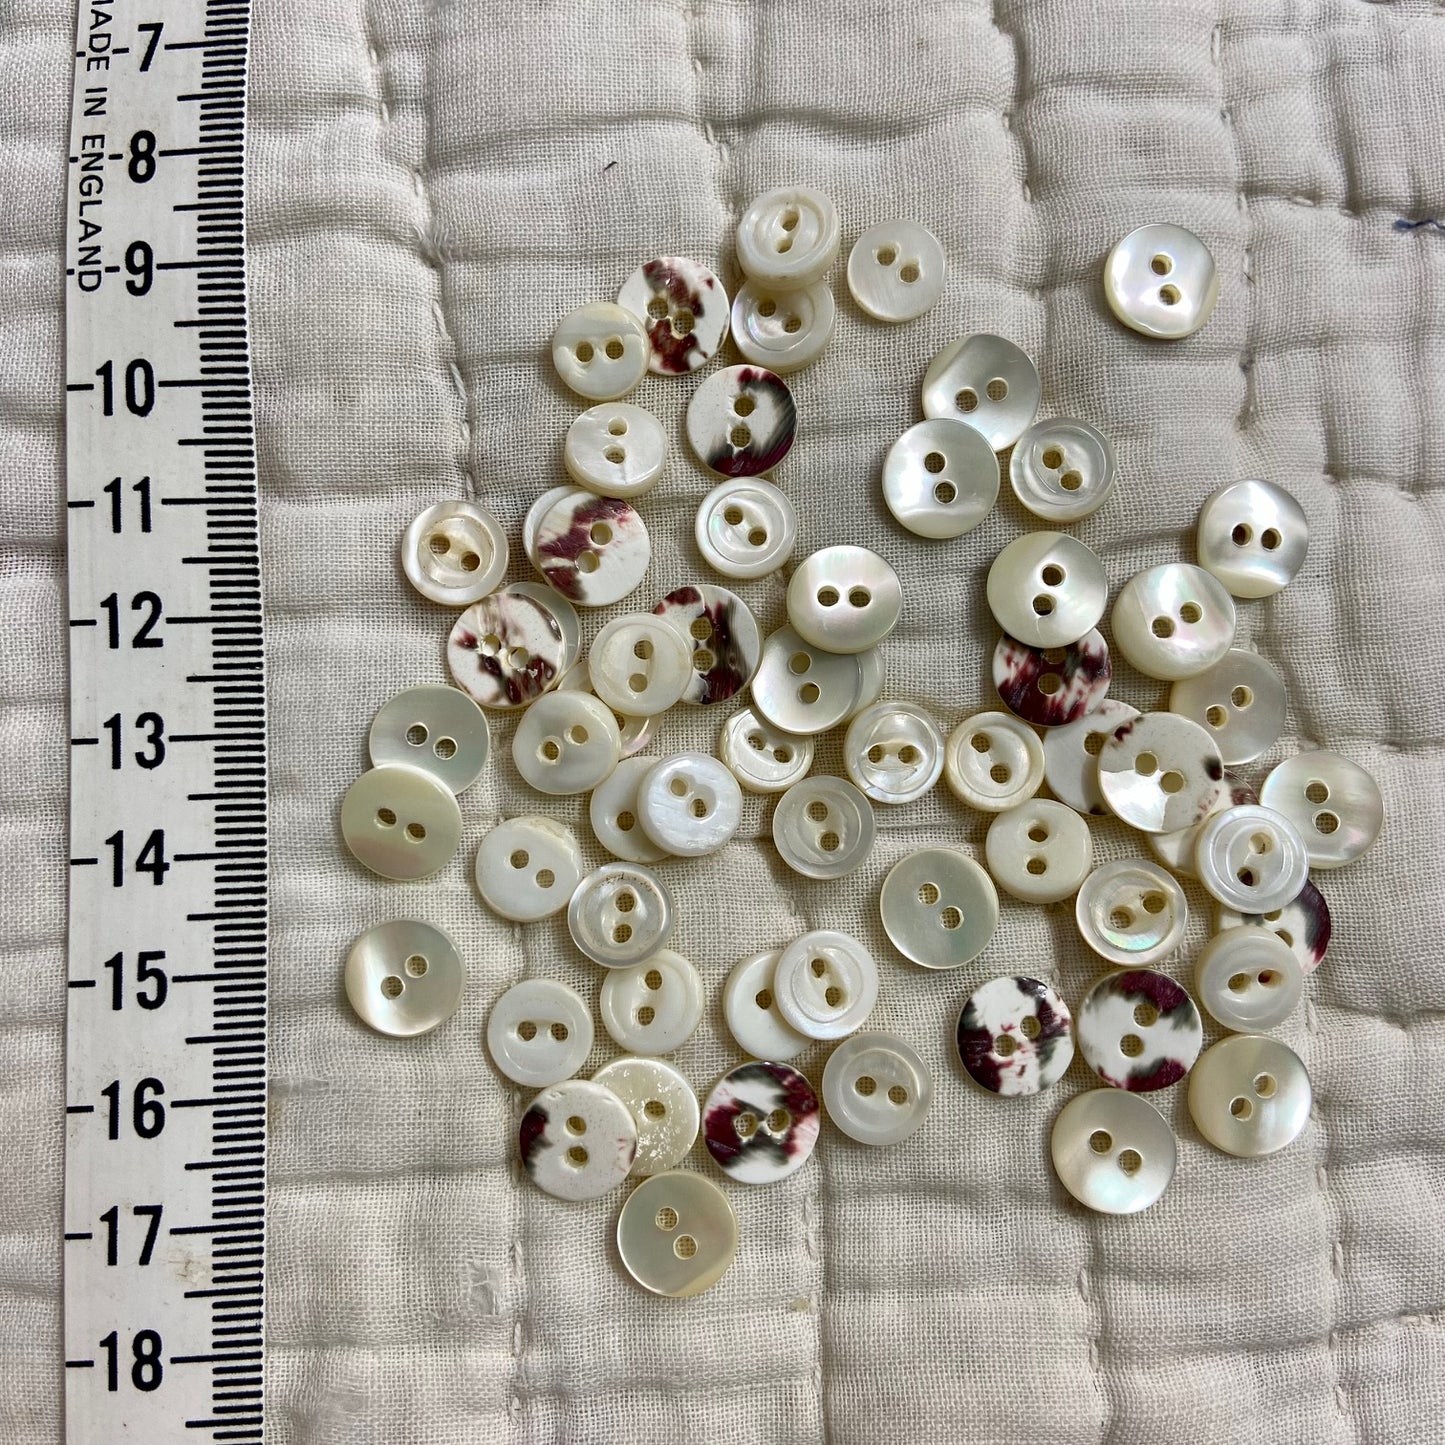 Item 2311-Small Buttons